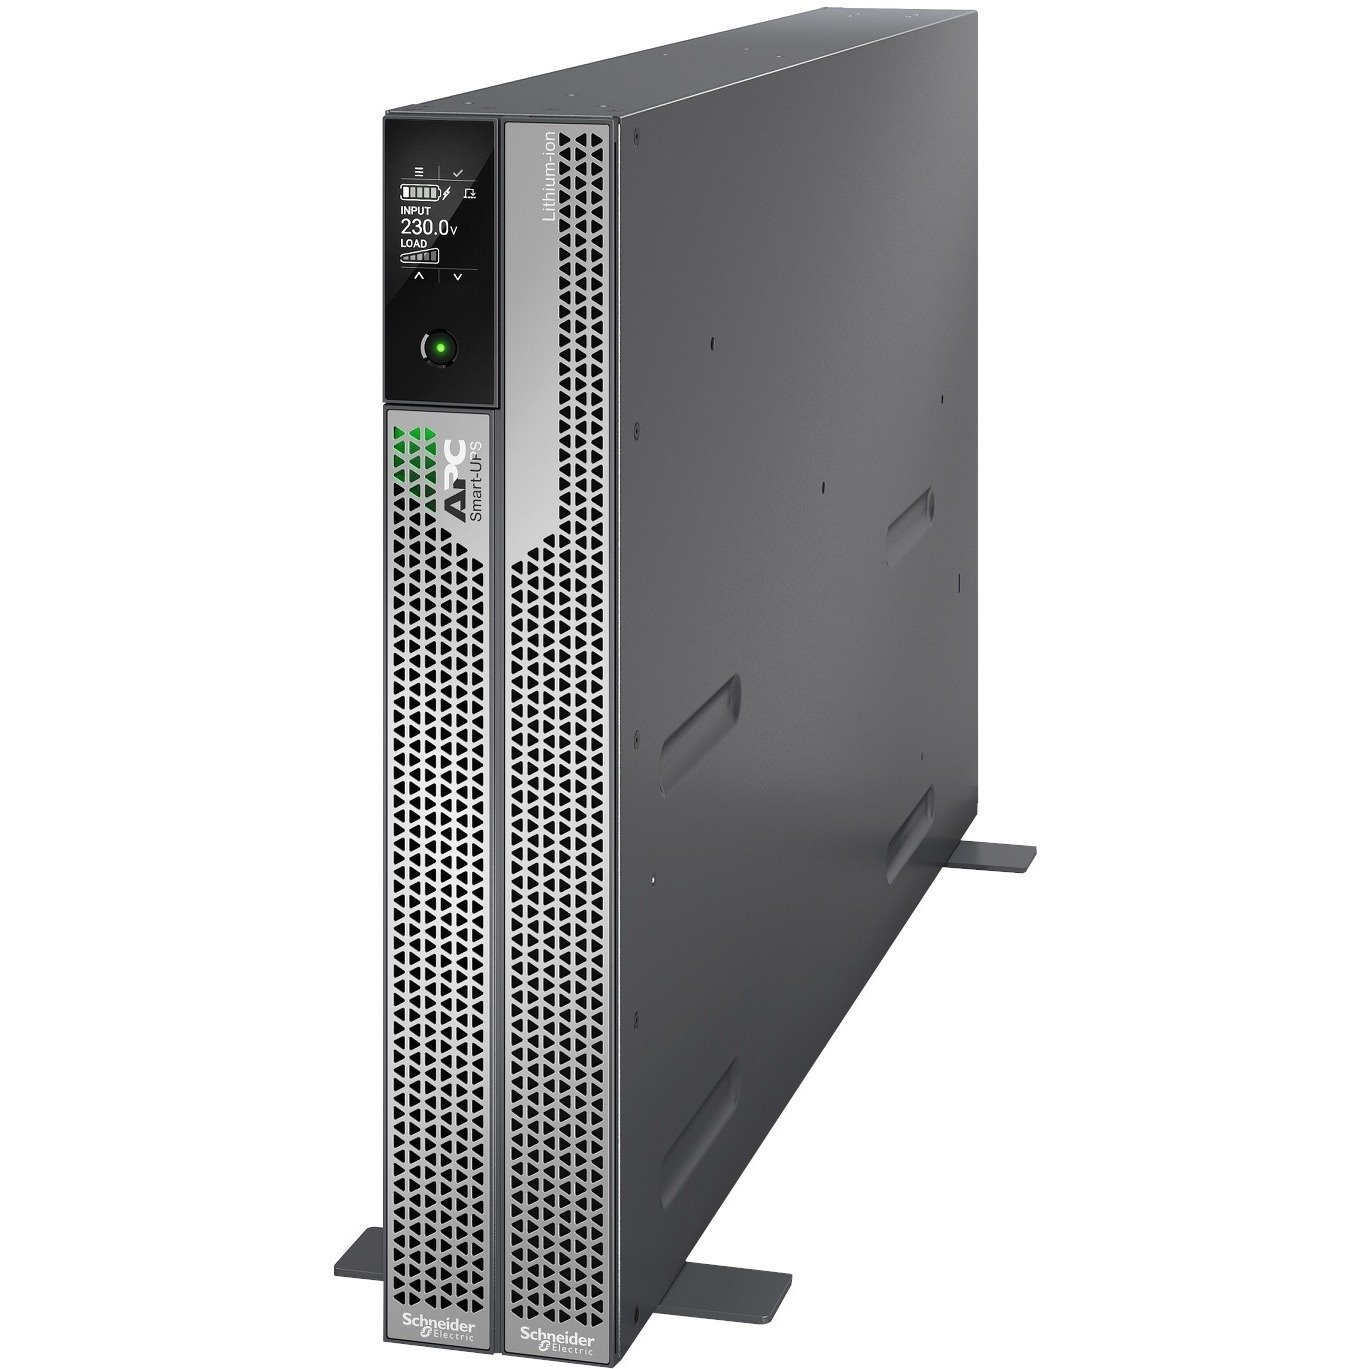 APC by Schneider Electric Smart-UPS Ultra On-Line Lithium ion, 5KVA/5KW, 2U Rack/Tower, 230V